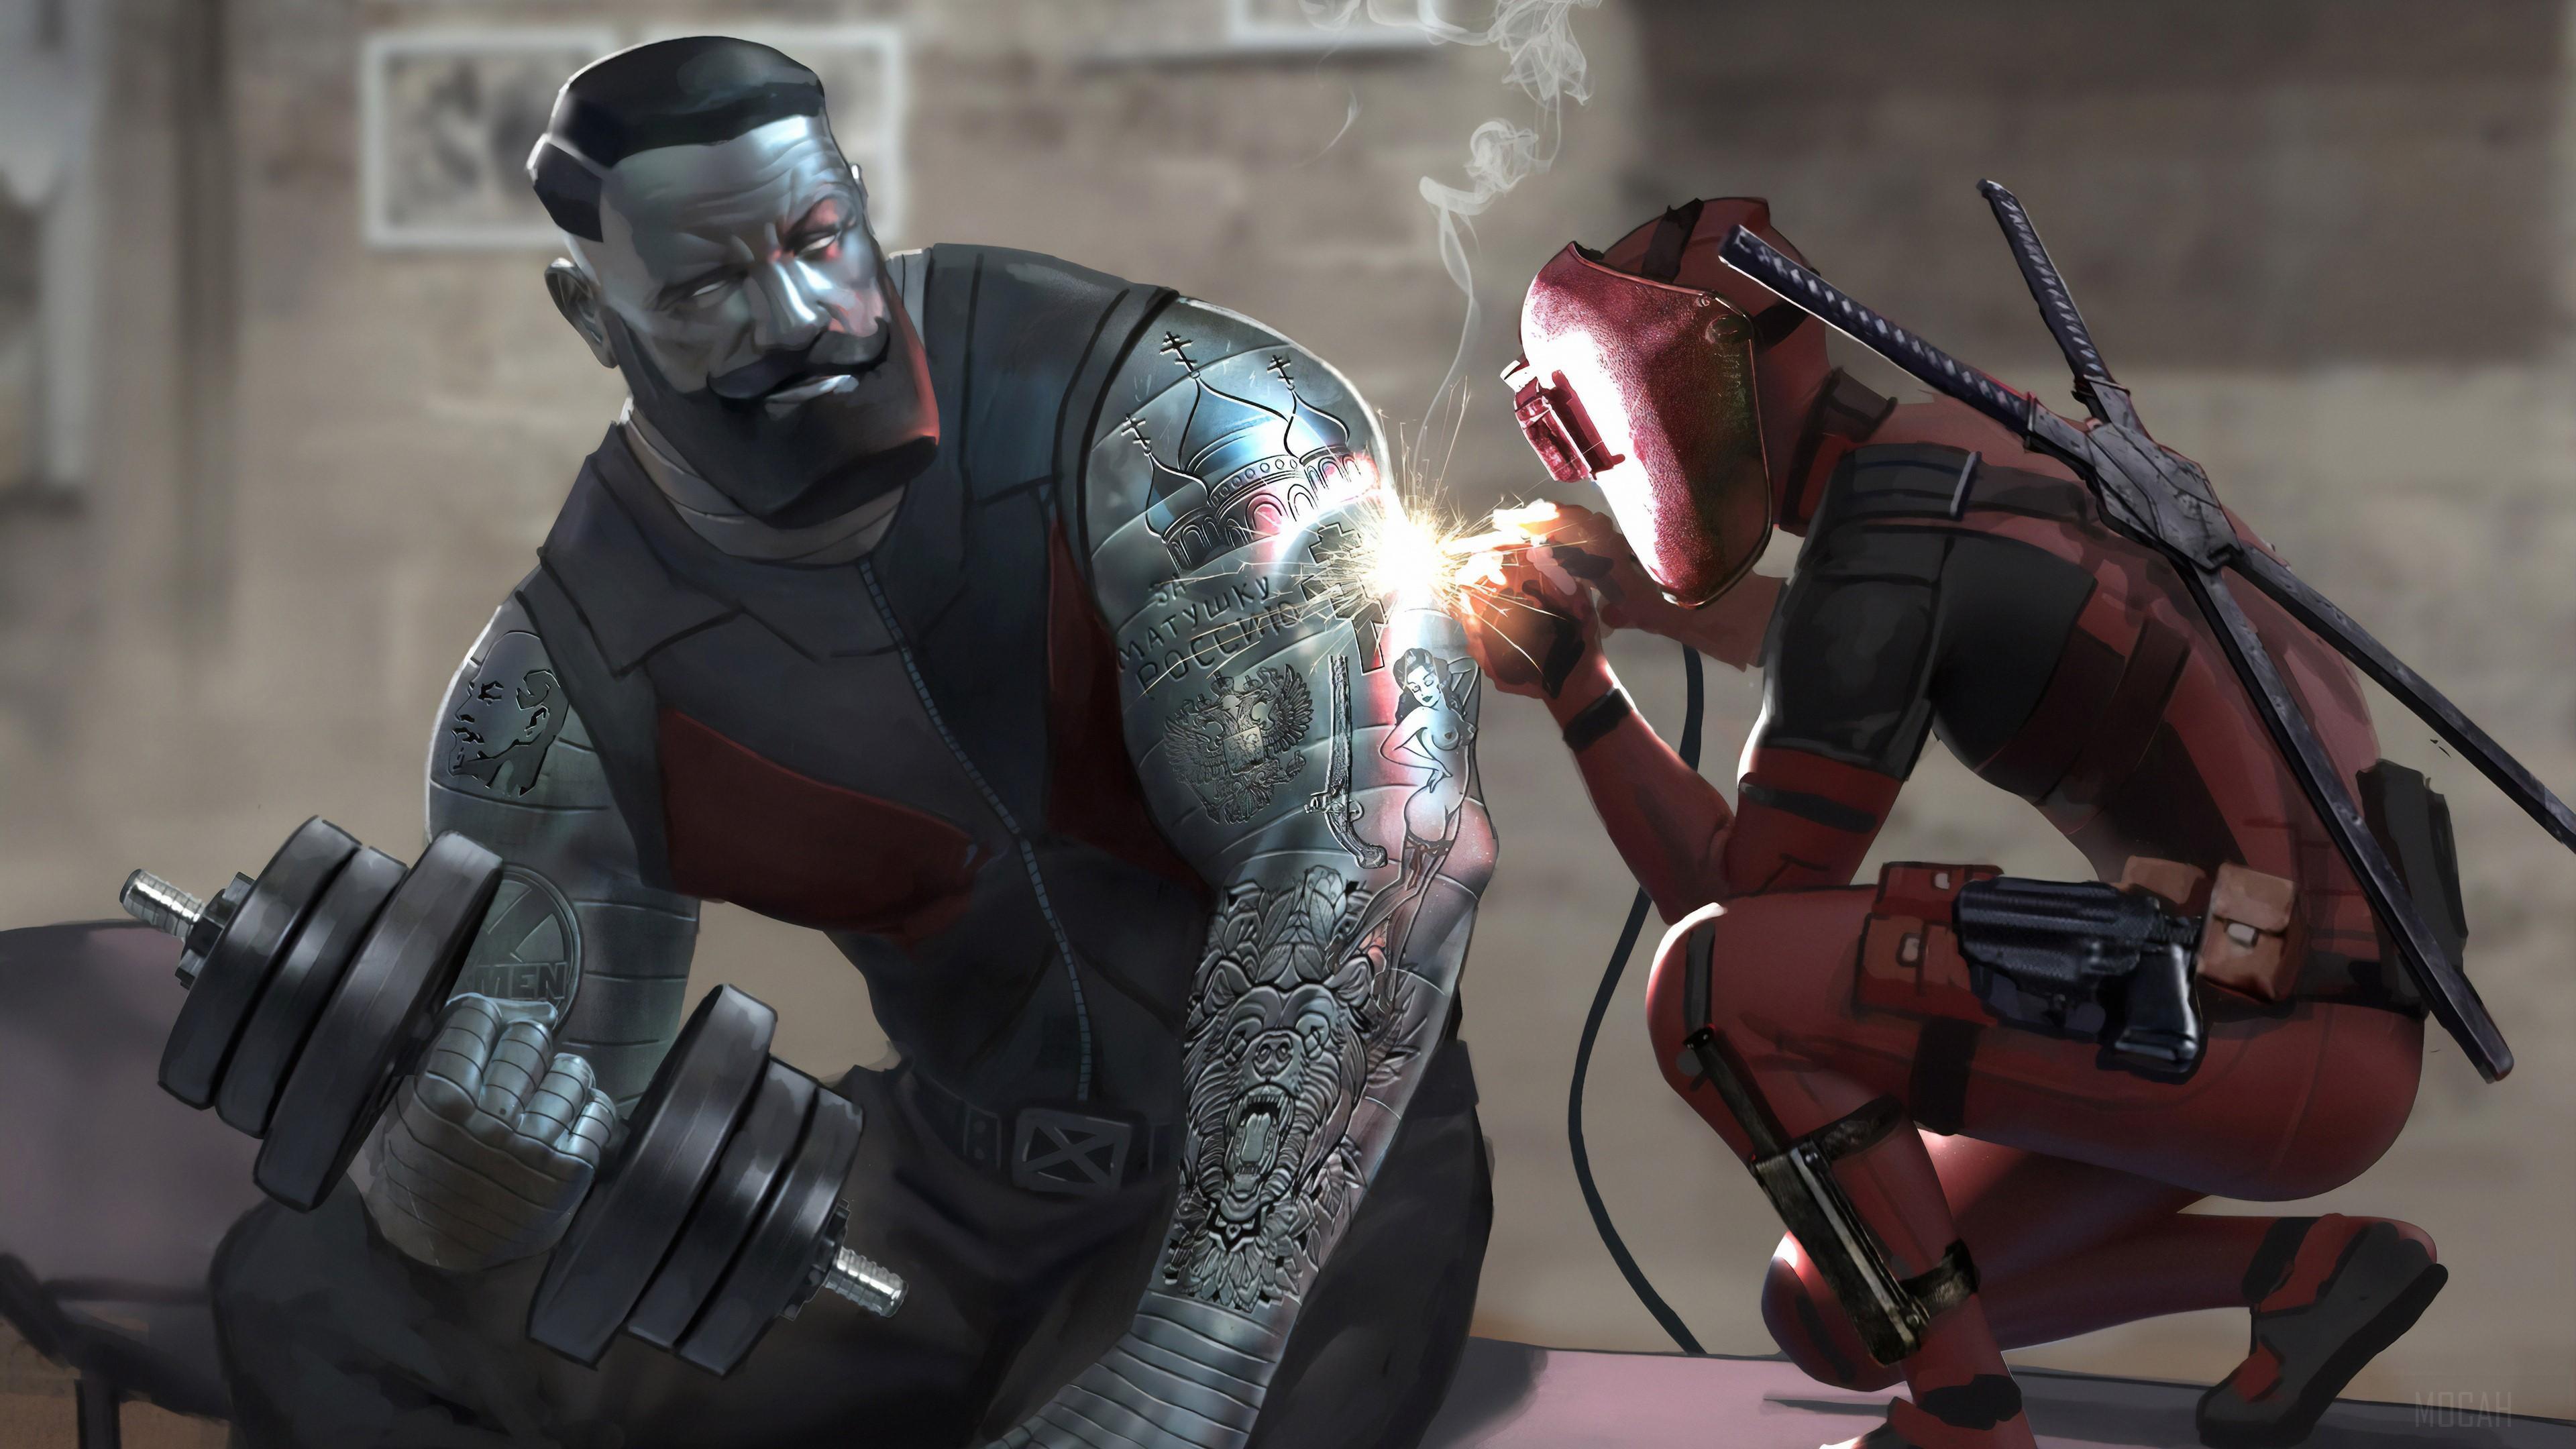 HD wallpaper, Colossus Deadpool Decided To Help Him 4K